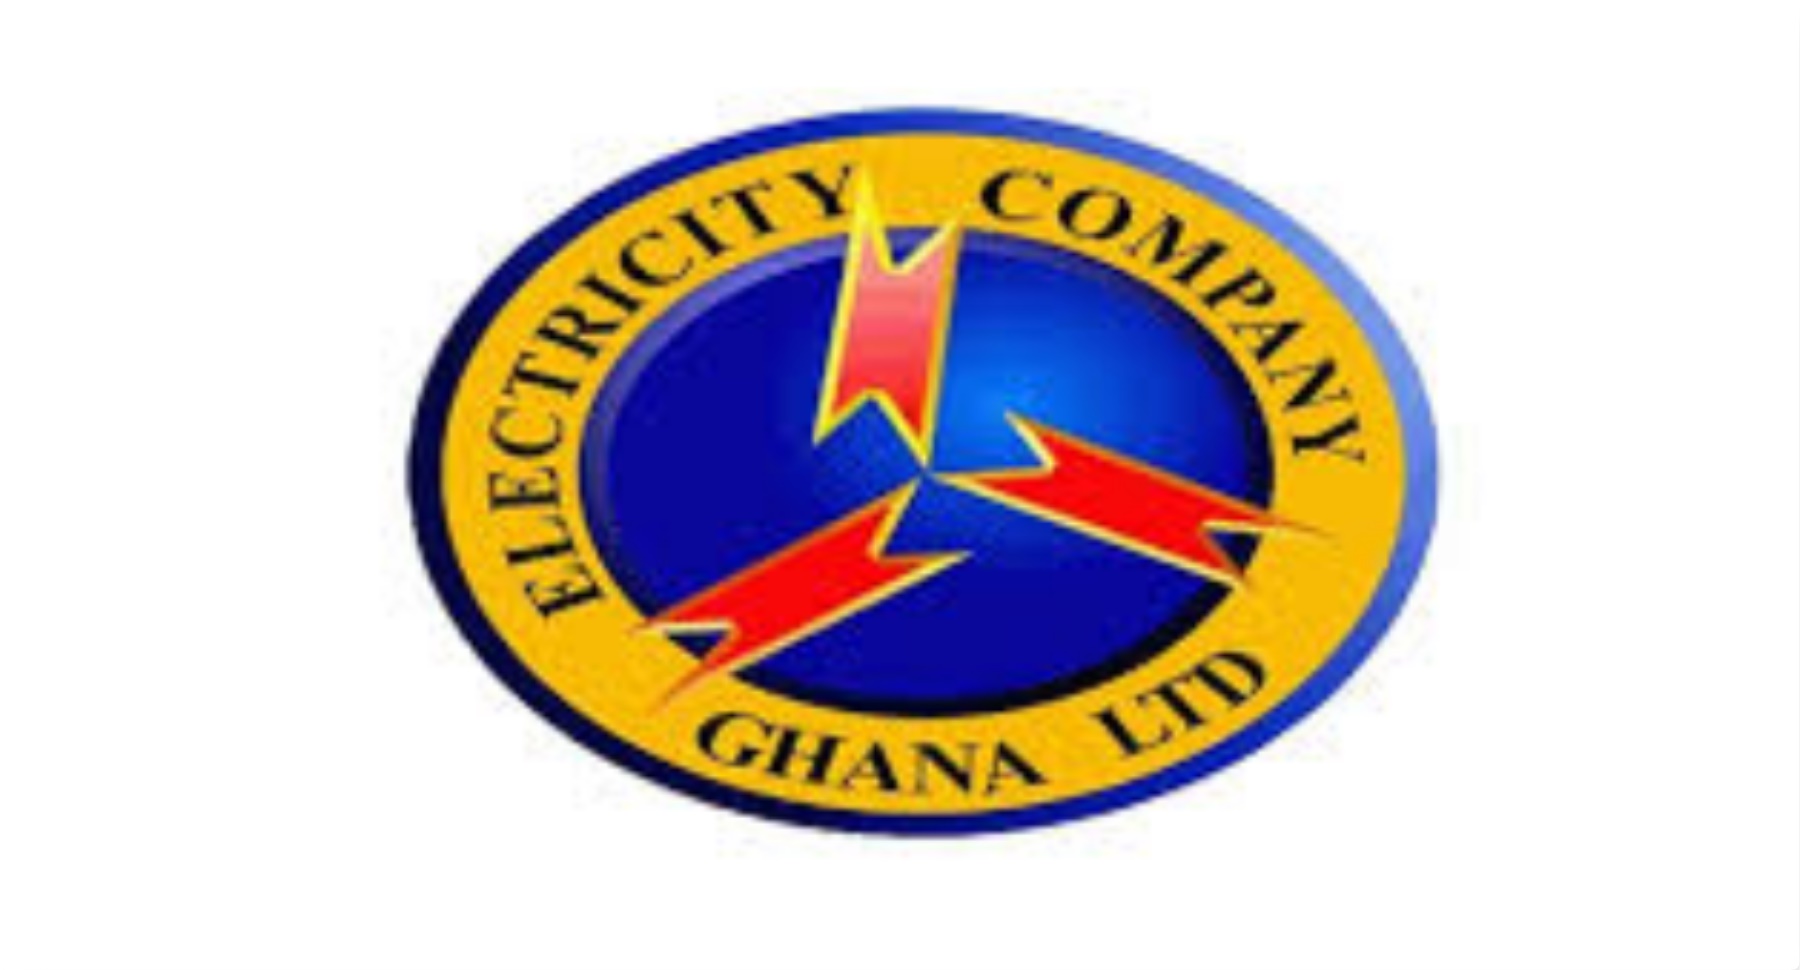 ECG finally sold - company to take over on February 1